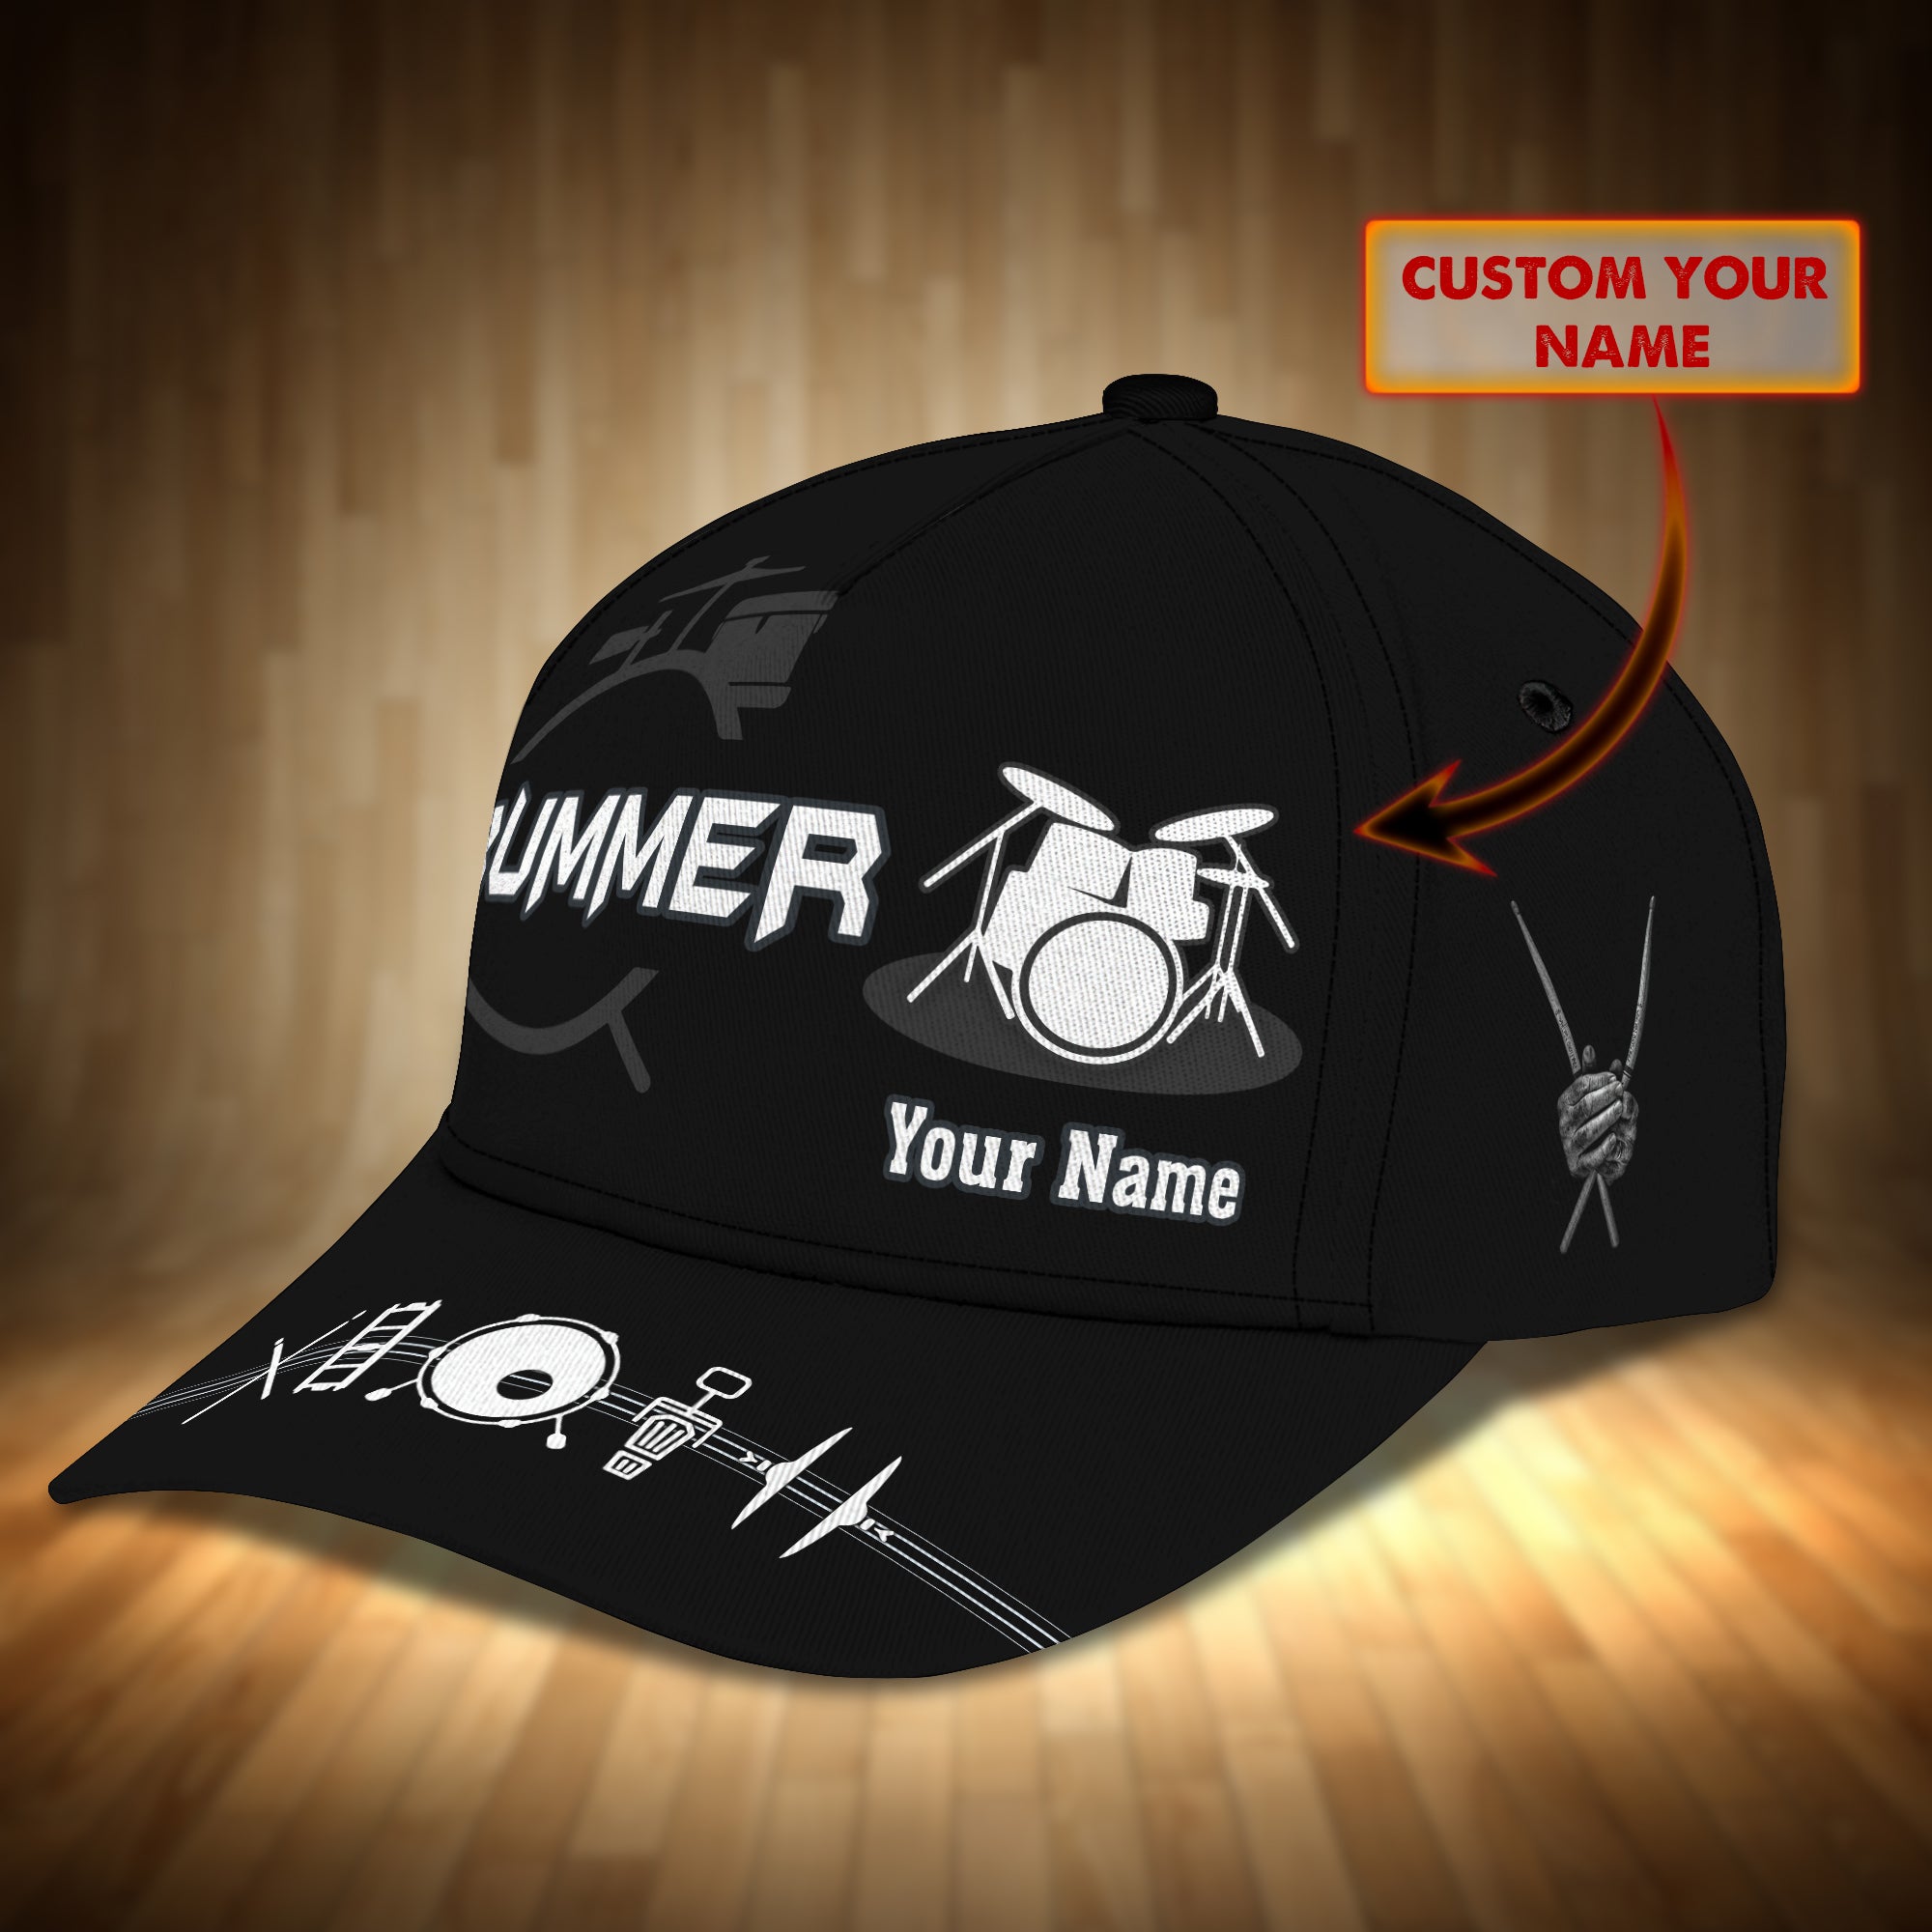 Drummer Personalized Name Cap 15 RinC